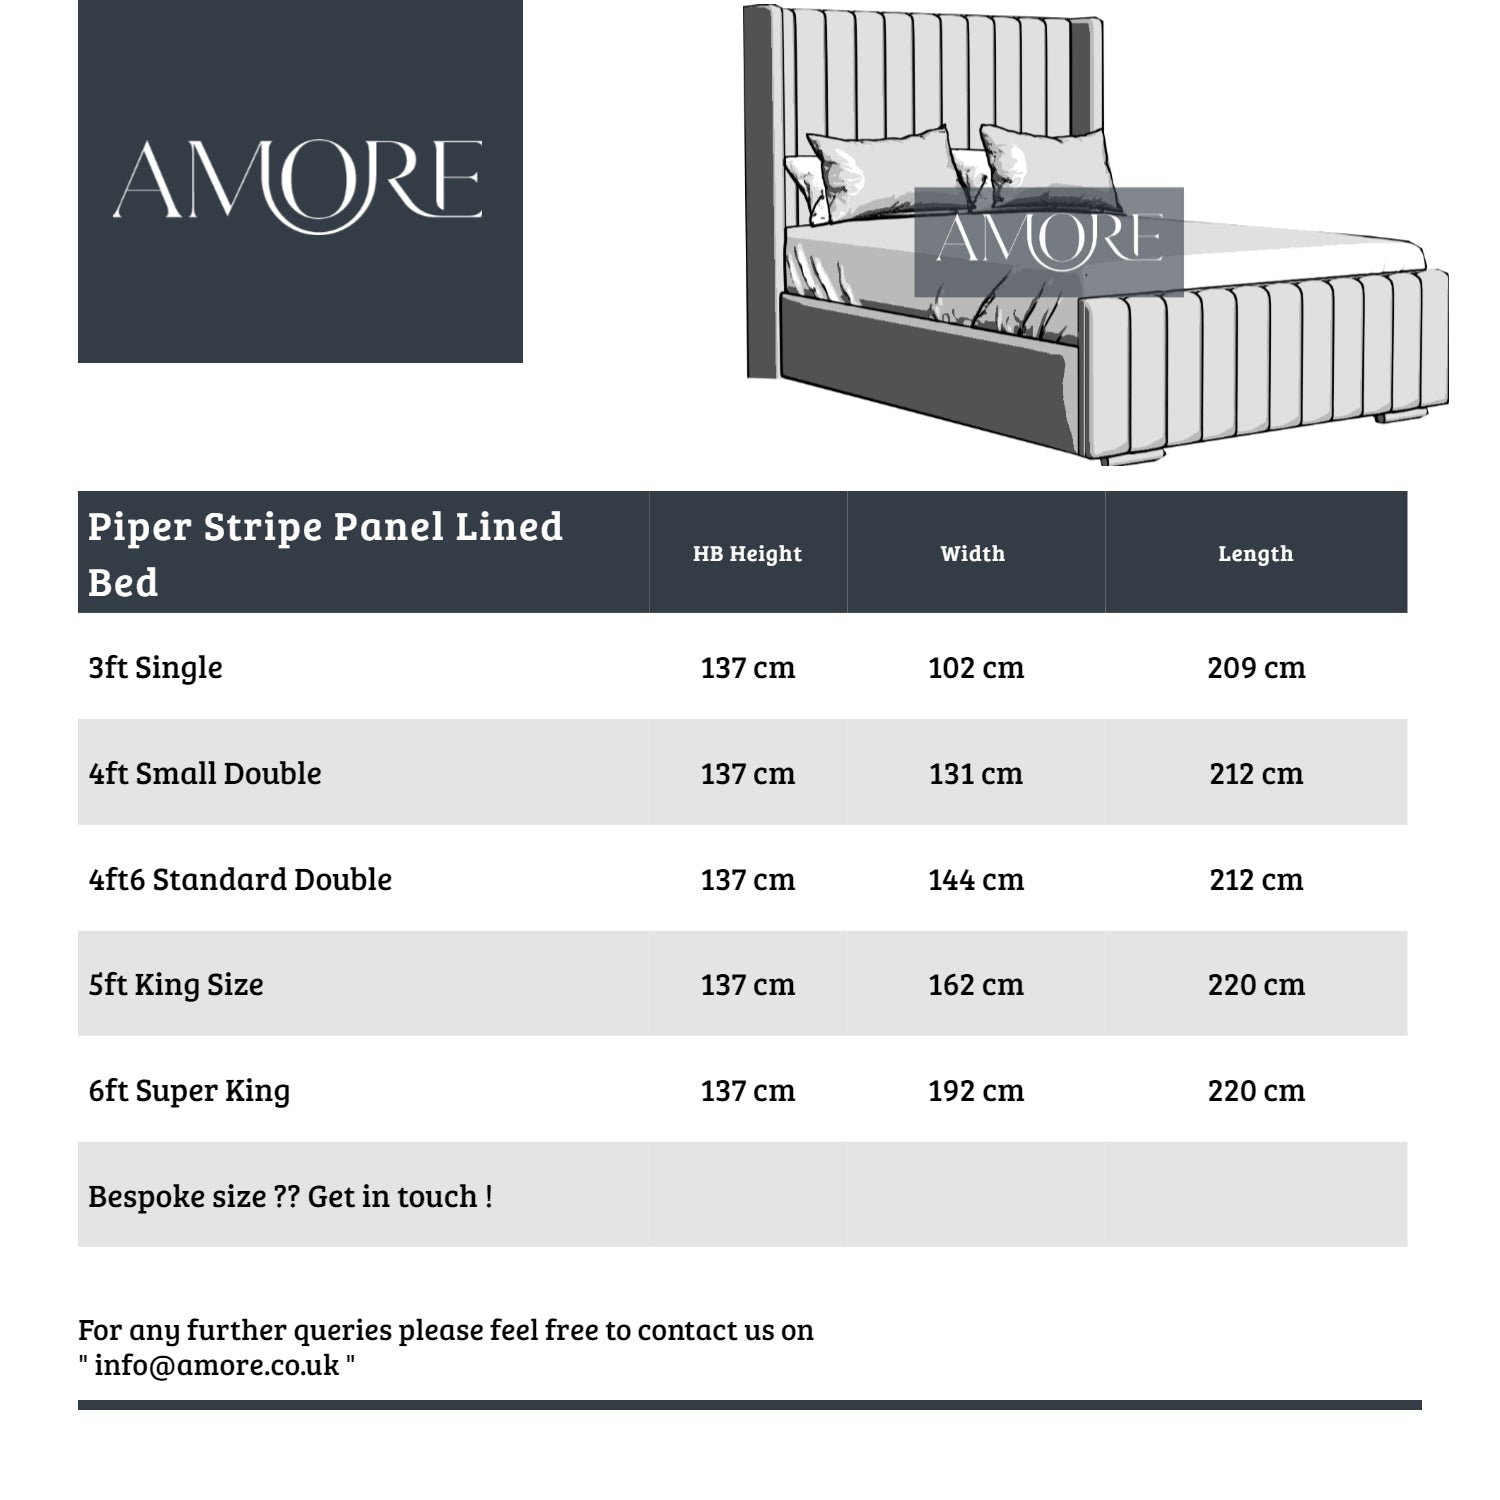 Piper Stripe Panel Lined Bed - Amore UK Standard Size